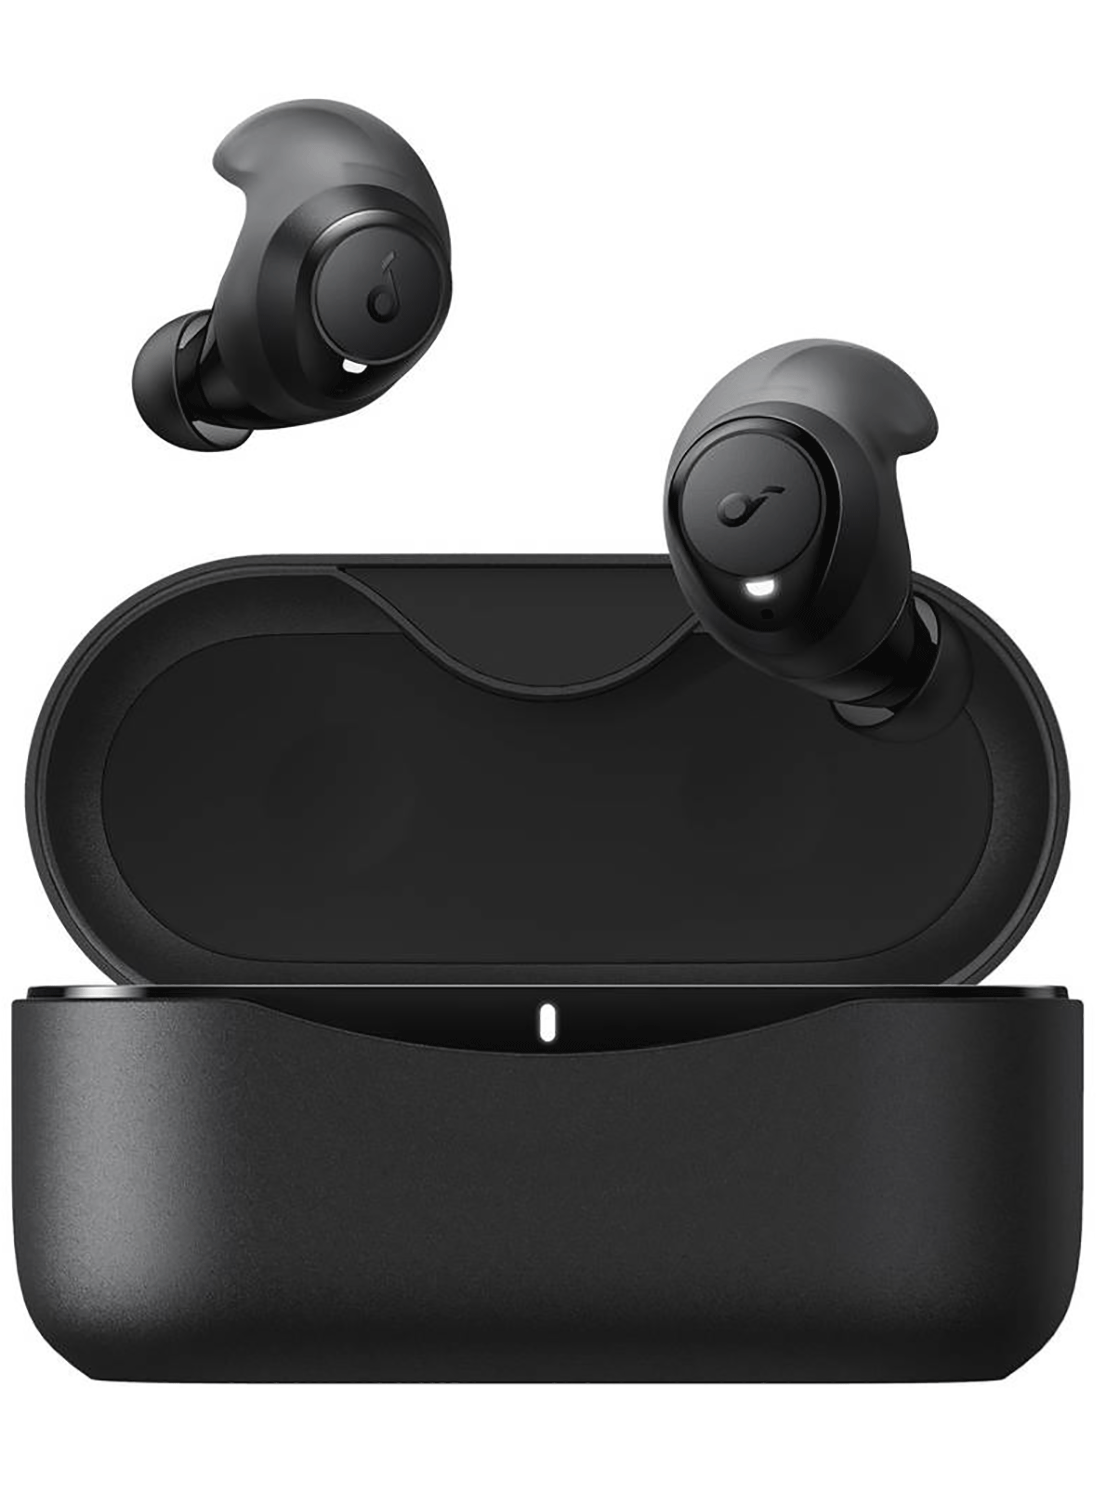 Anker Soundcore Life Dot 2 EarBuds